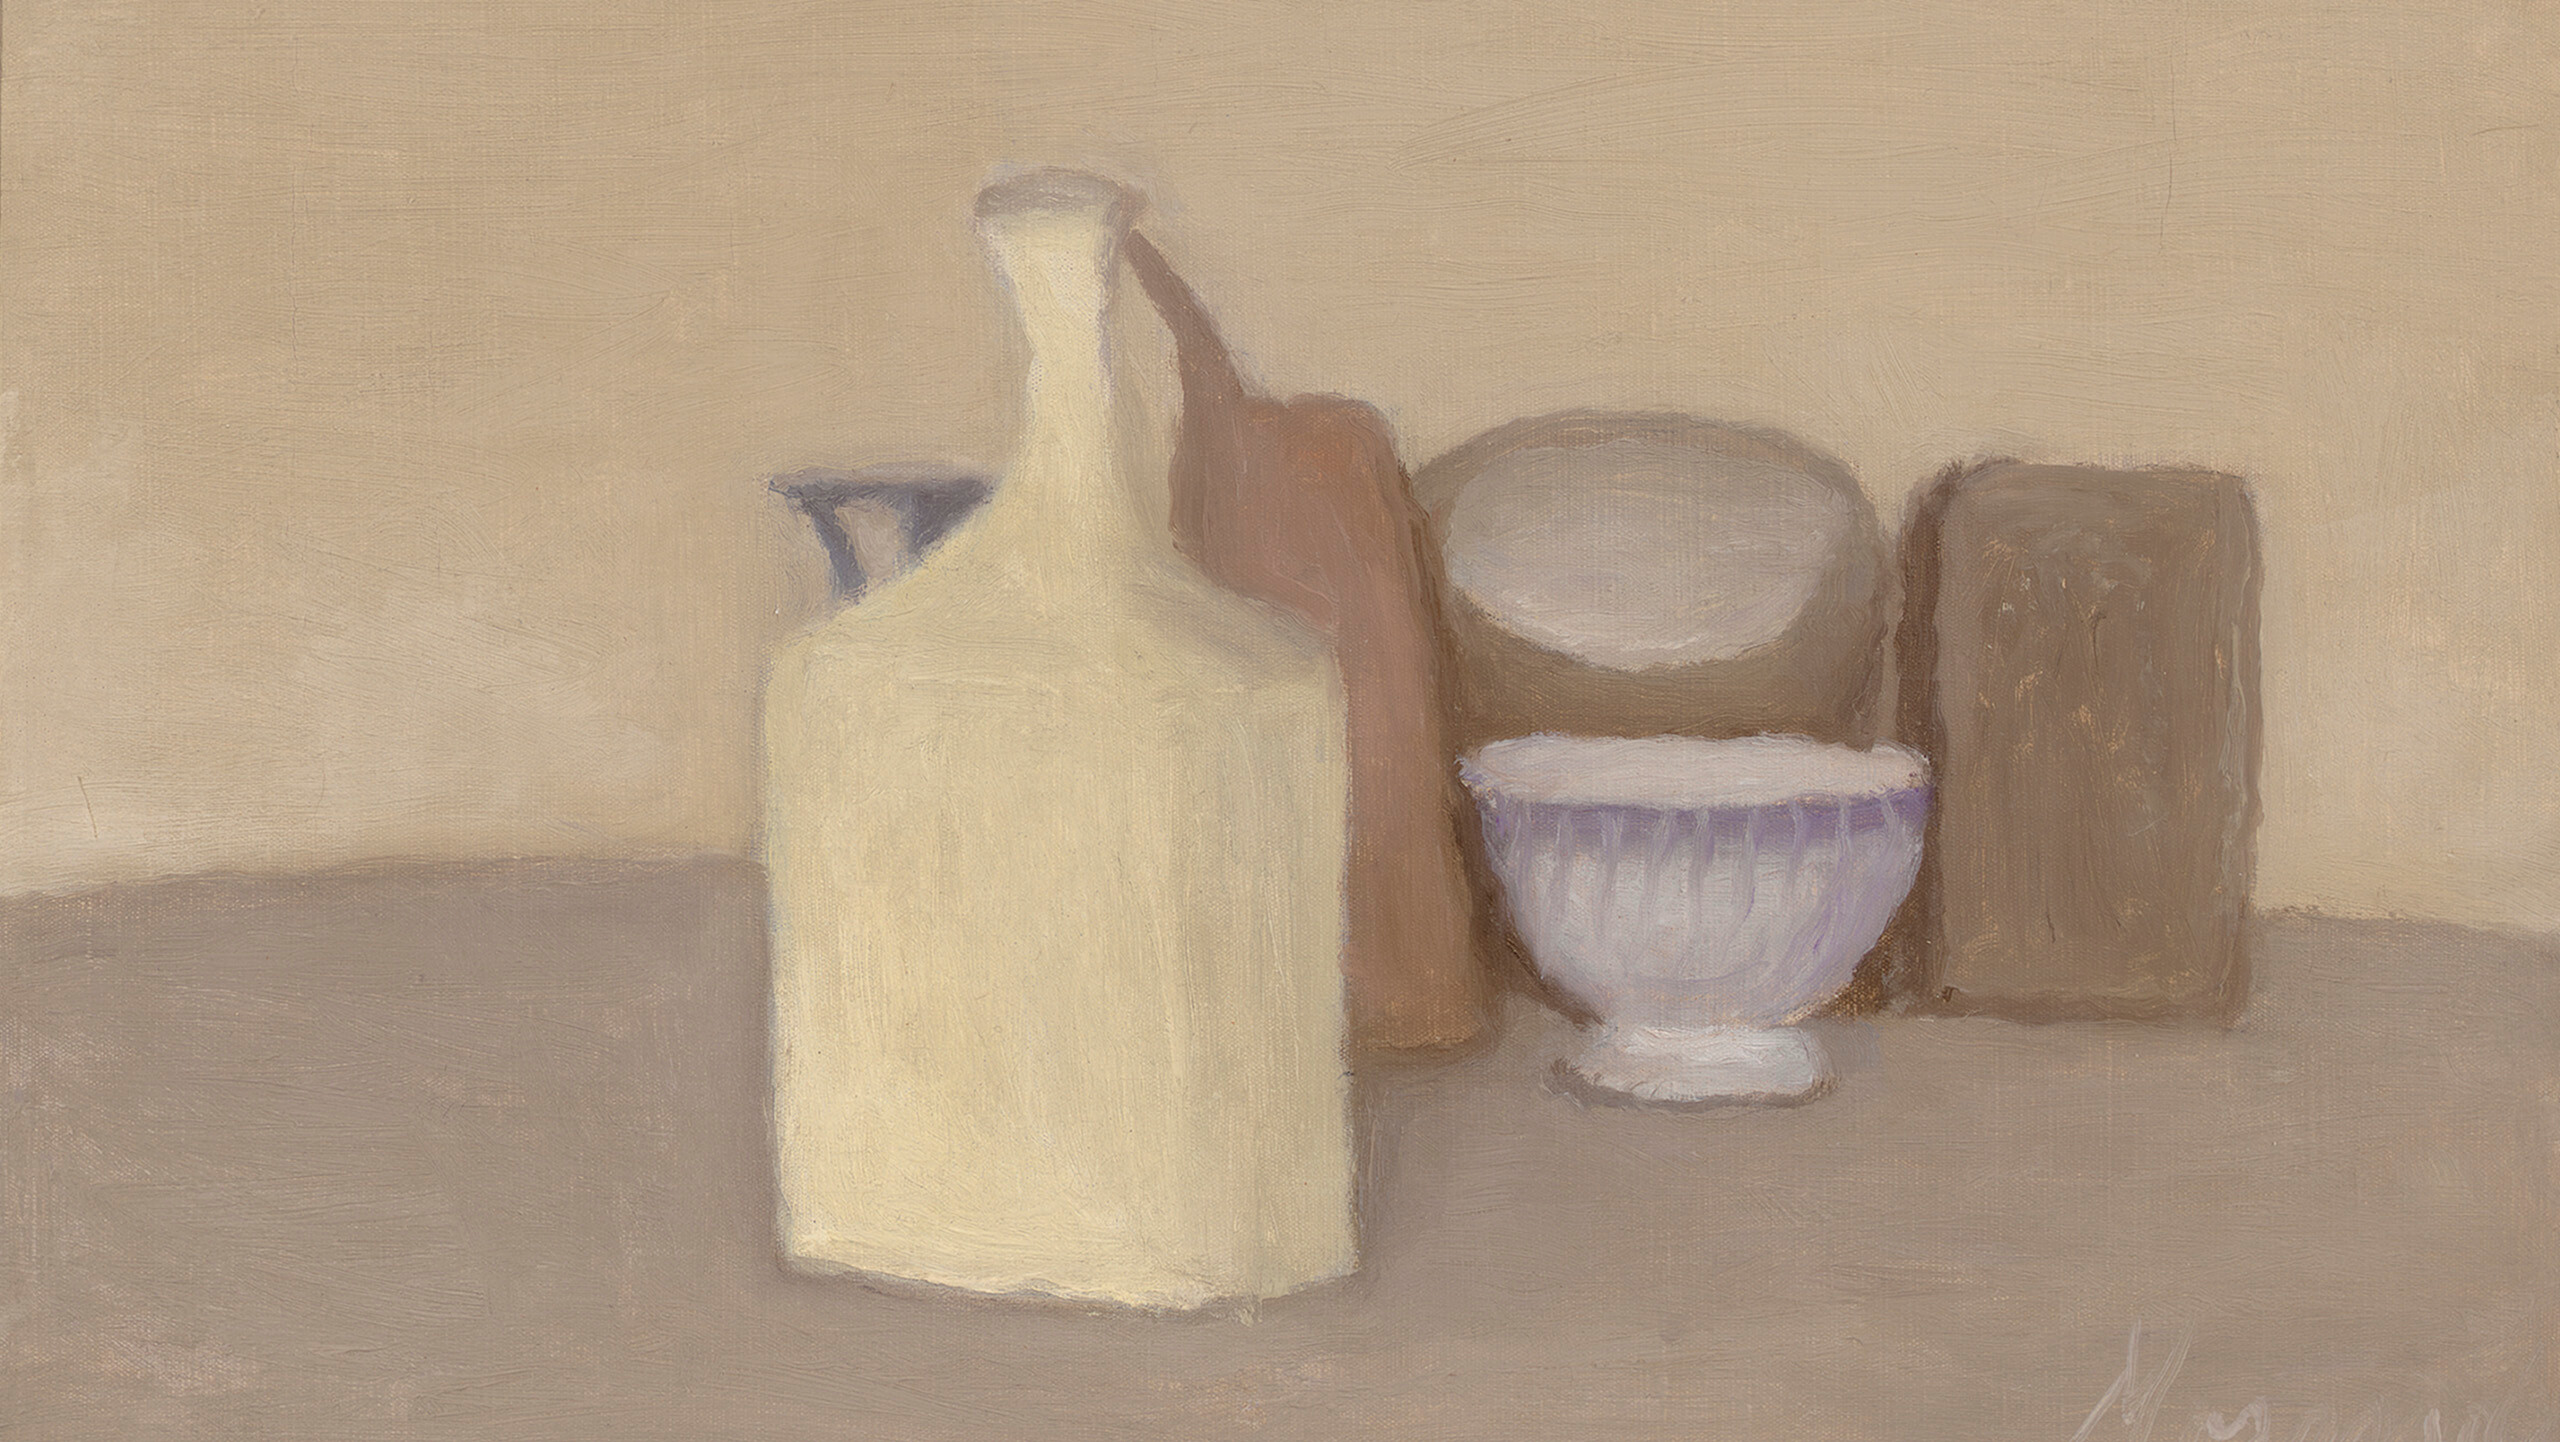 A detail from the work titled Natura morta (Still Life) by Giorgio Morandi, dated 1946.